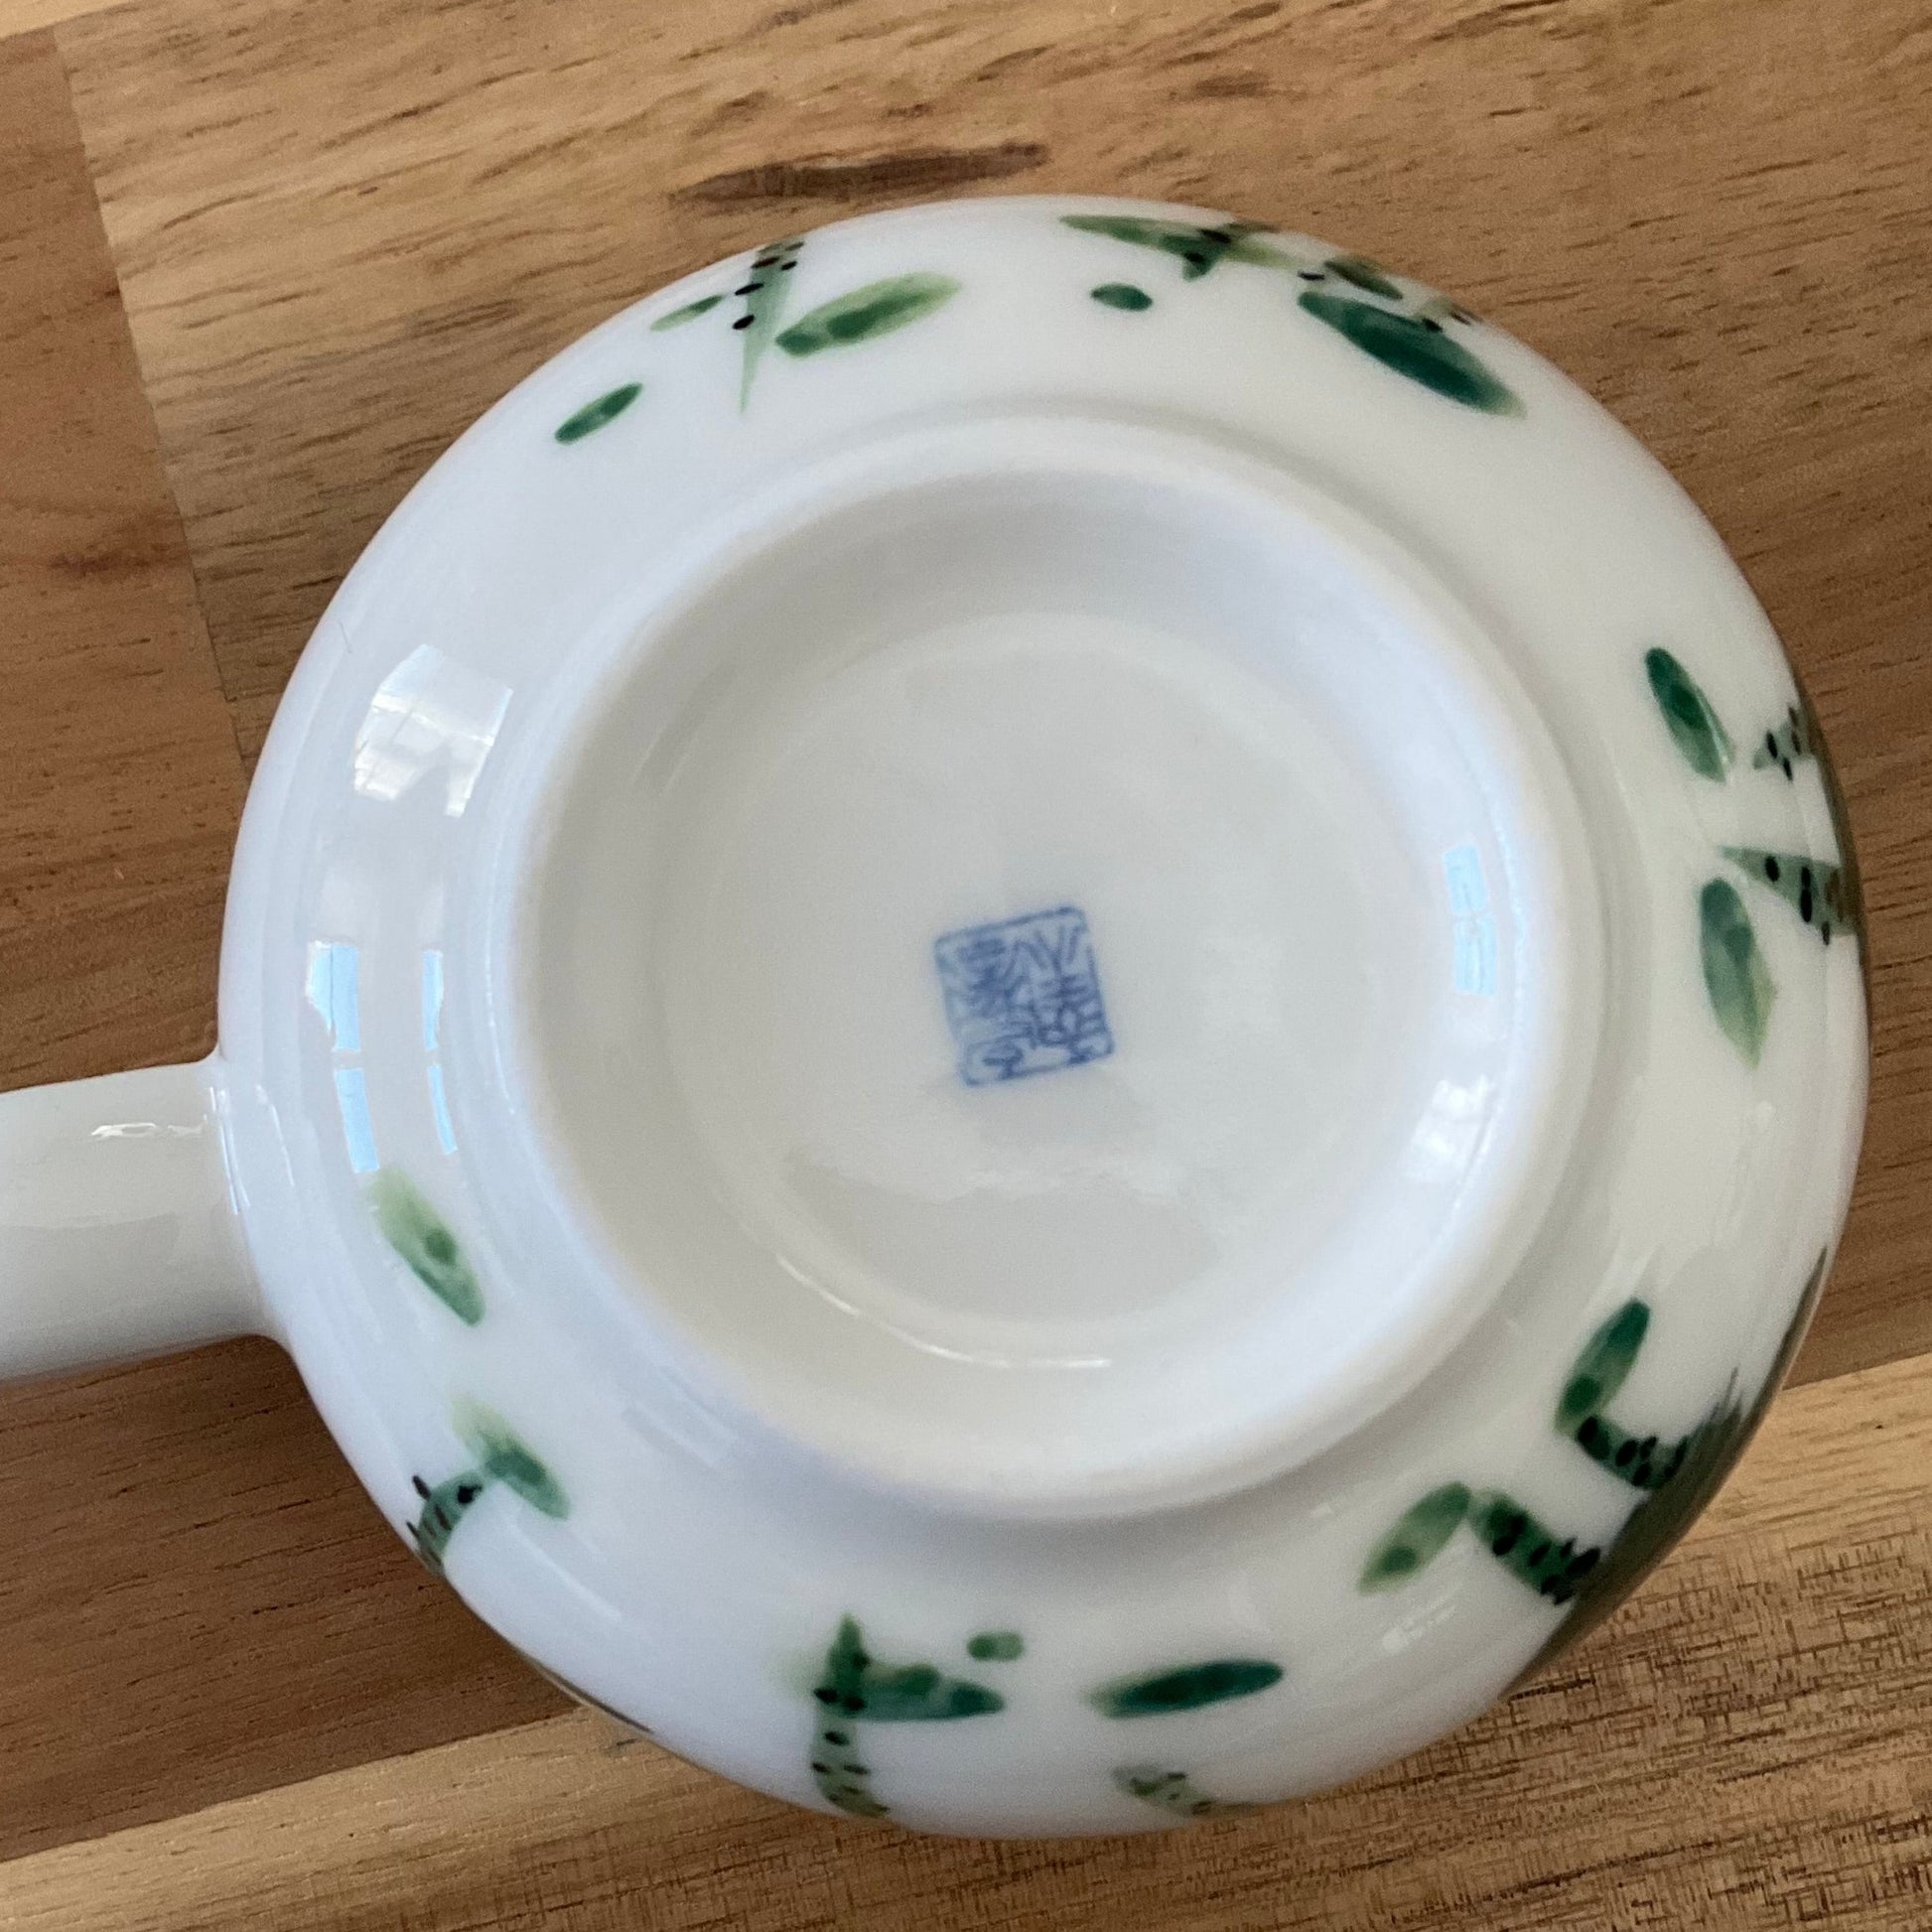 Bottom Seal of a Waterlily Latte Cup